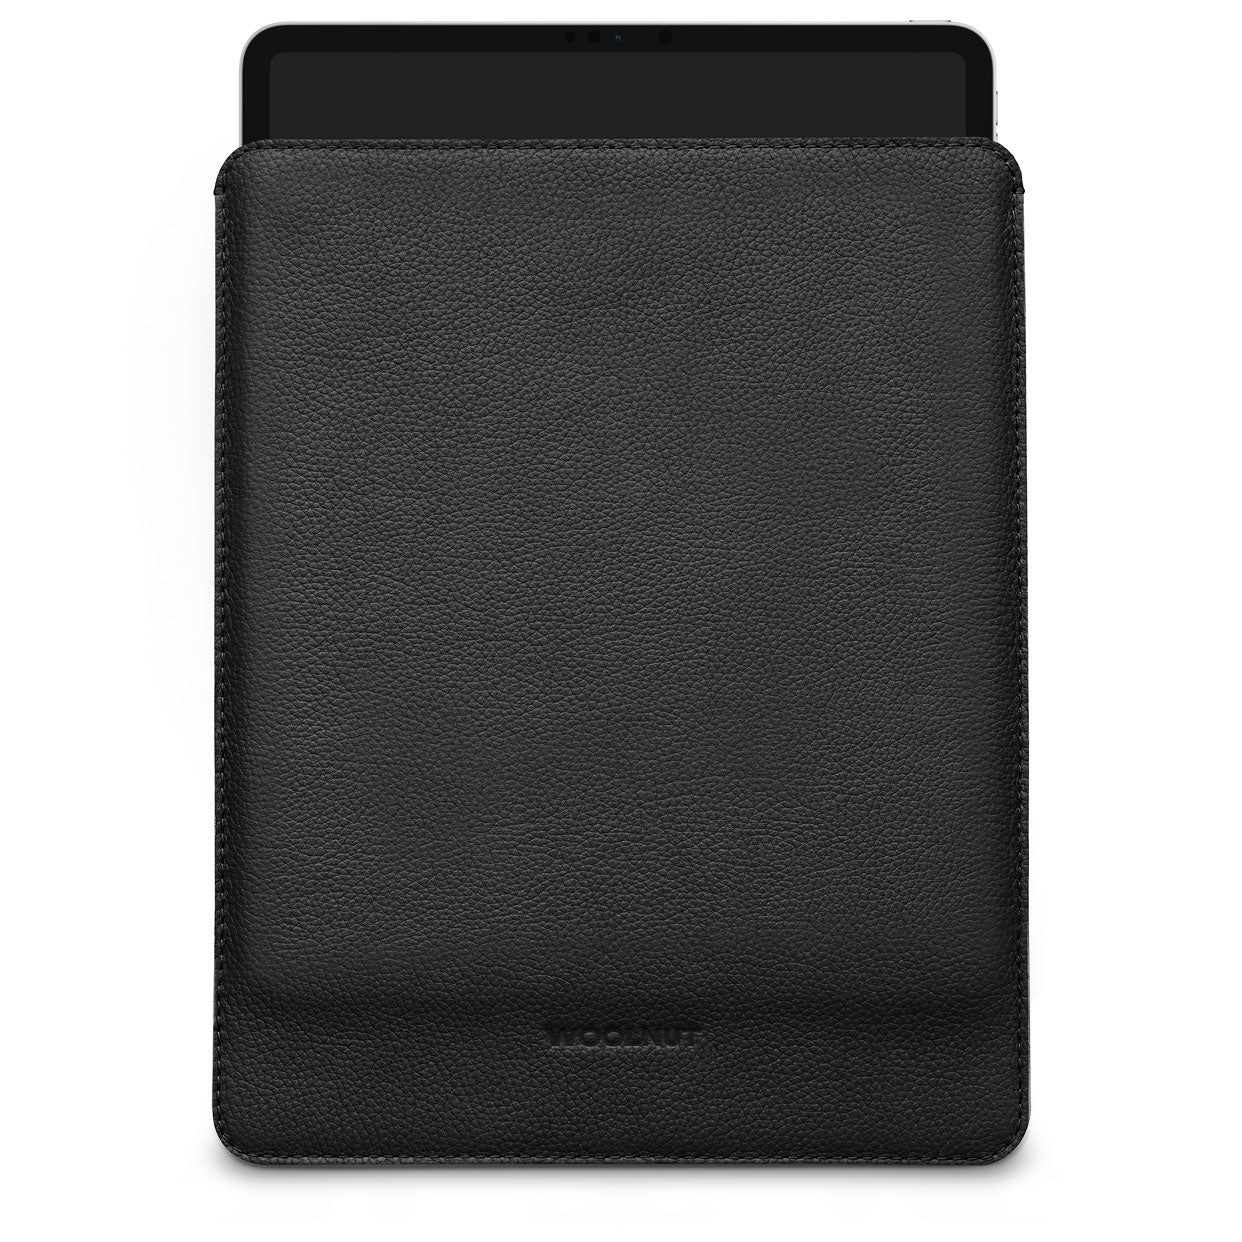 Leather Sleeve for 13-inch iPad Pro & Air | Shop now – WOOLNUT